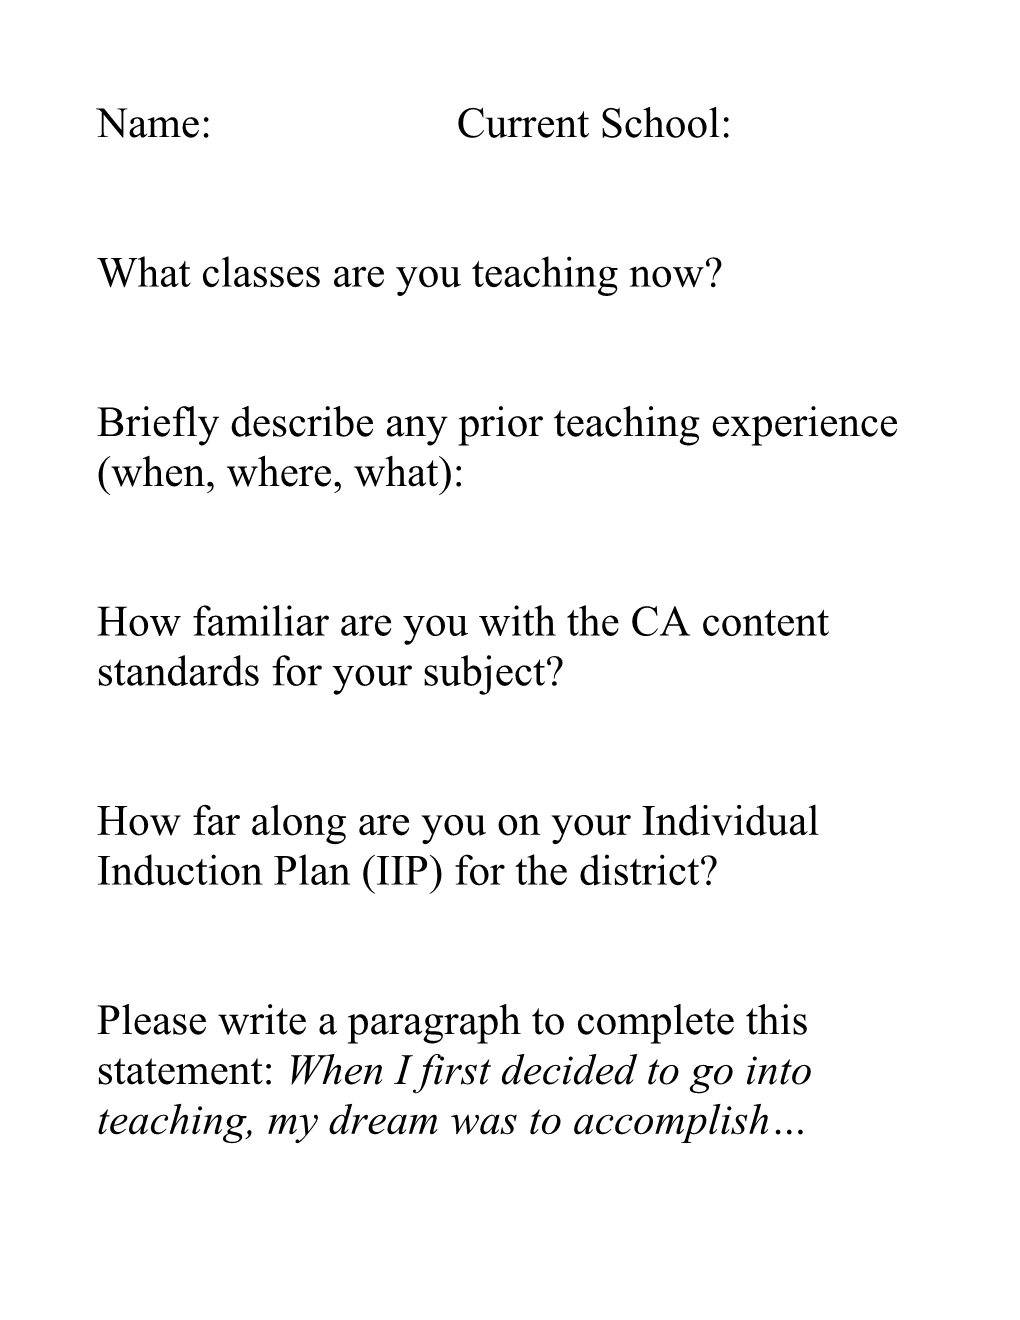 What Classes Are You Teaching Now?